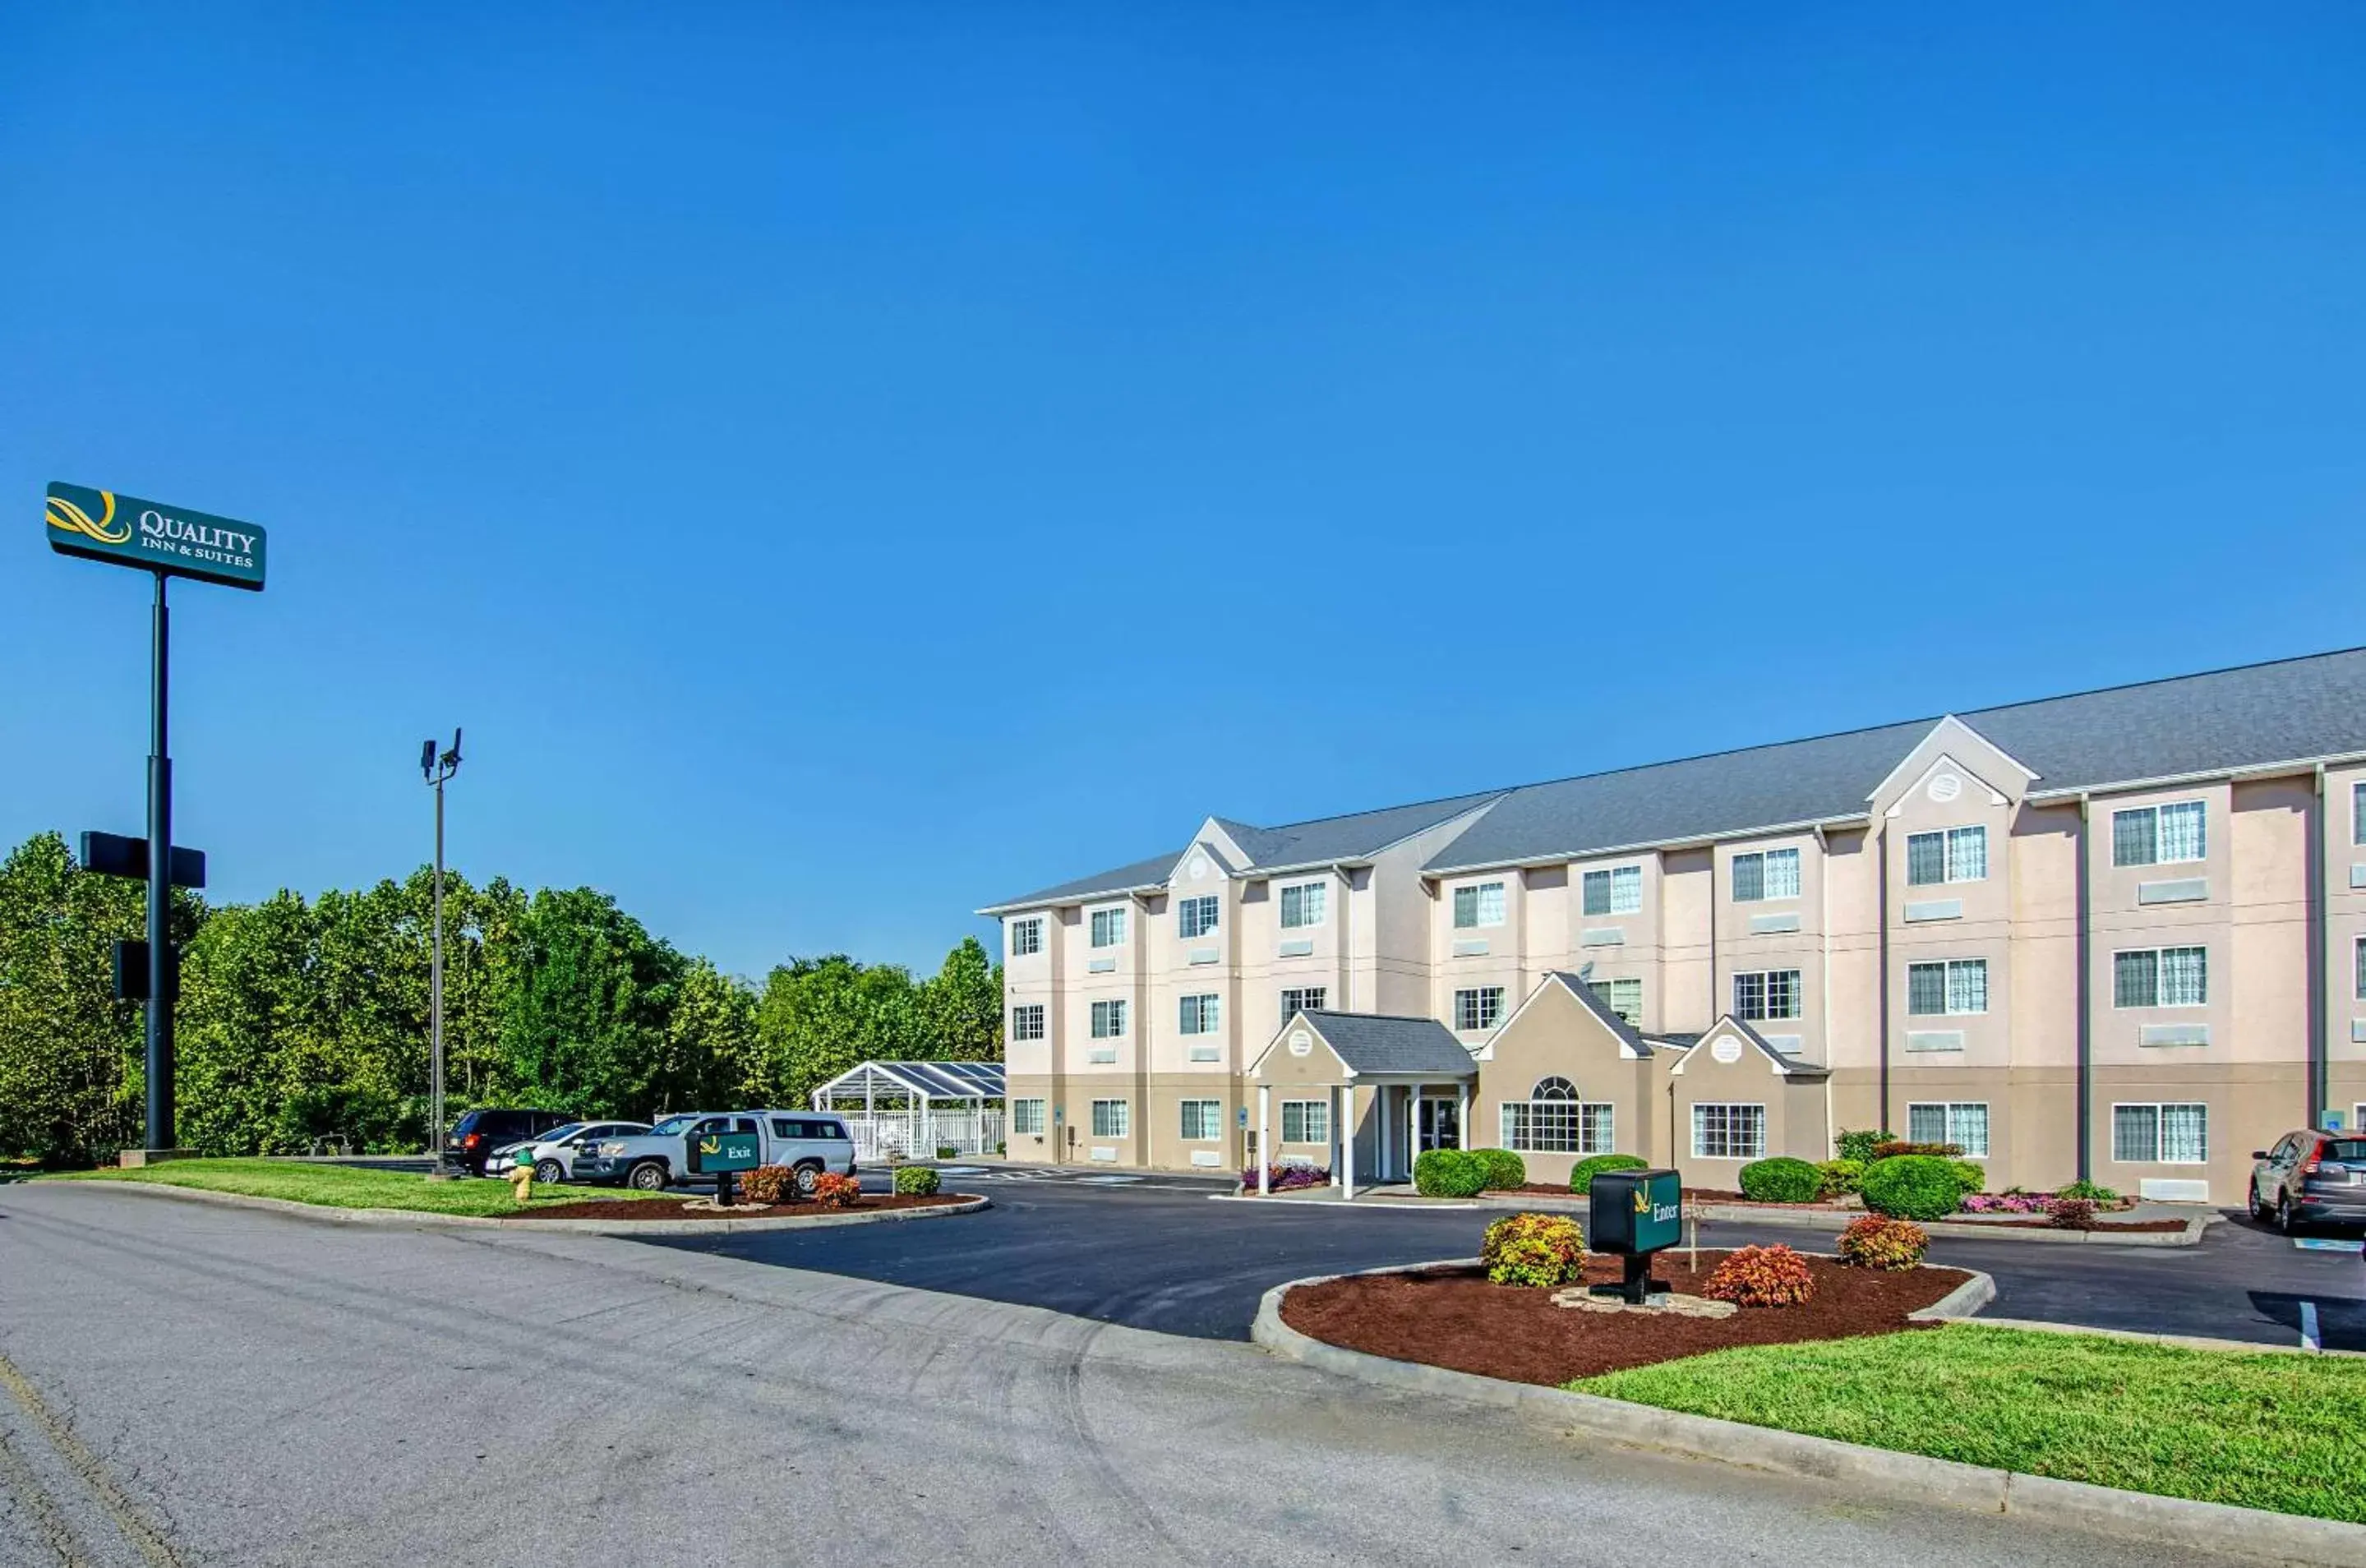 Property building in Quality Inn & Suites I-81 Exit 7